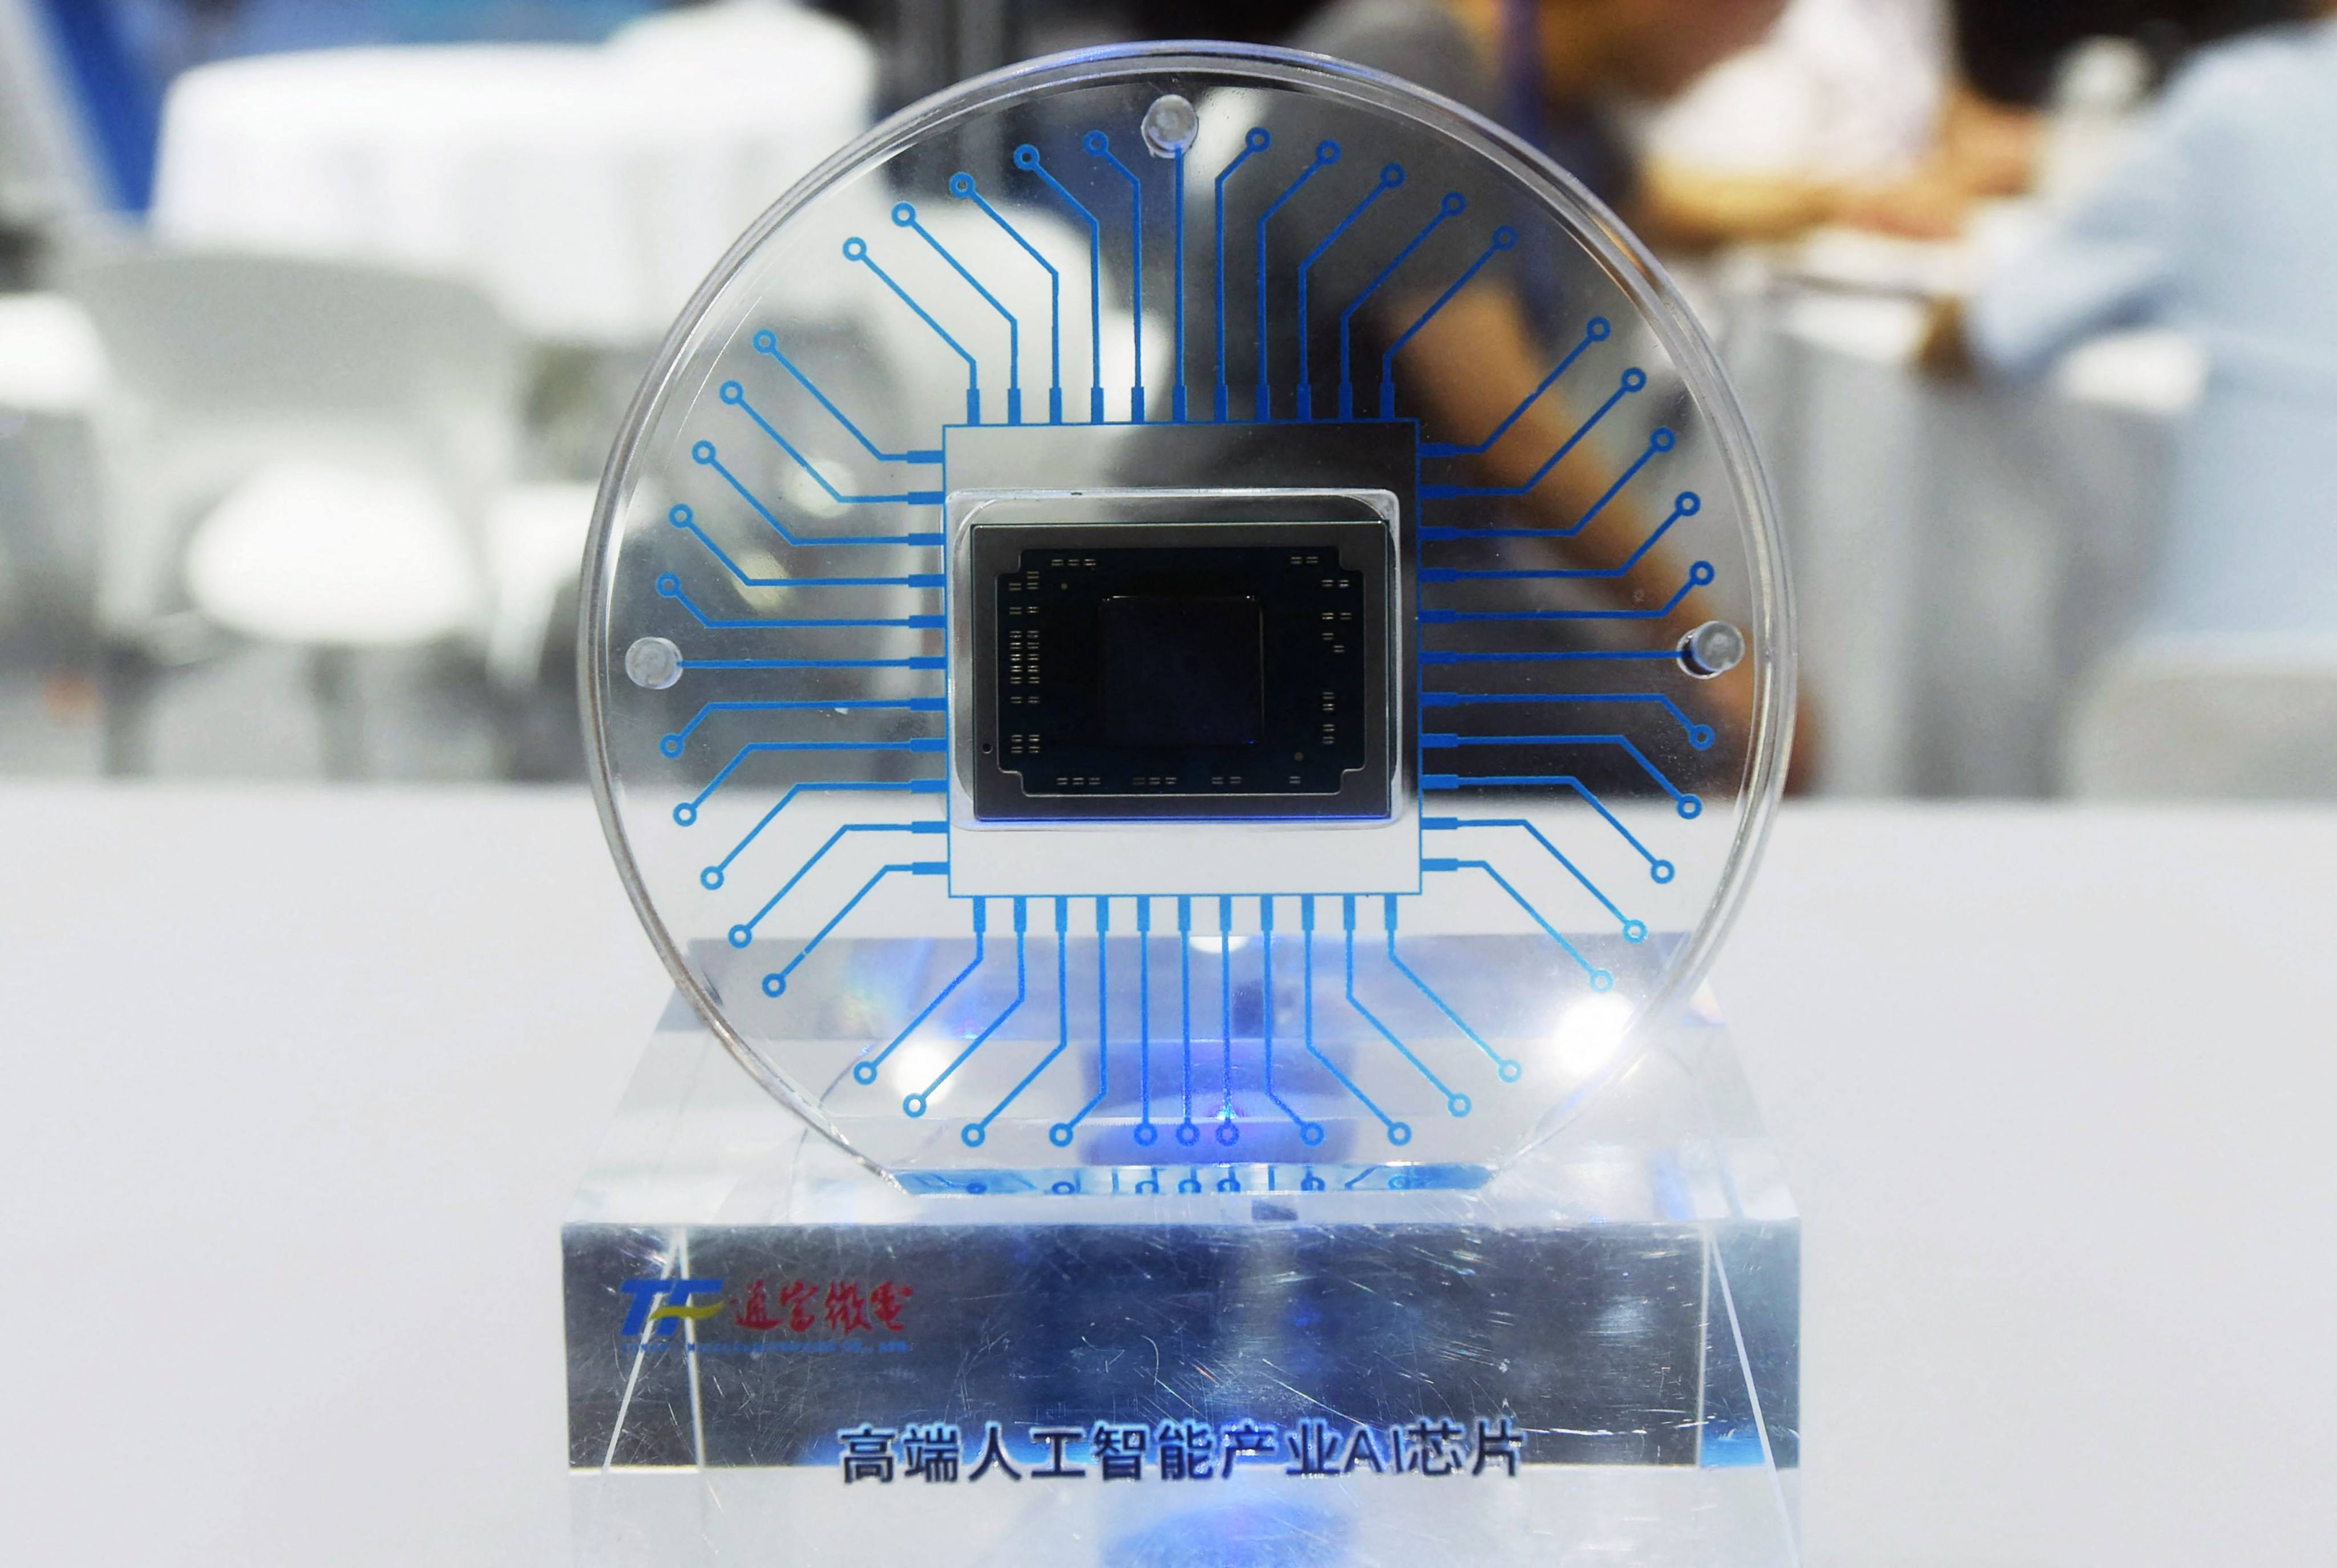 An AI chip is displayed during the World Semiconductor Congress in Nanjing in July. China hopes artificial intelligence will advance its economic development, according to Beijing’s annual work report. Photo: AFP